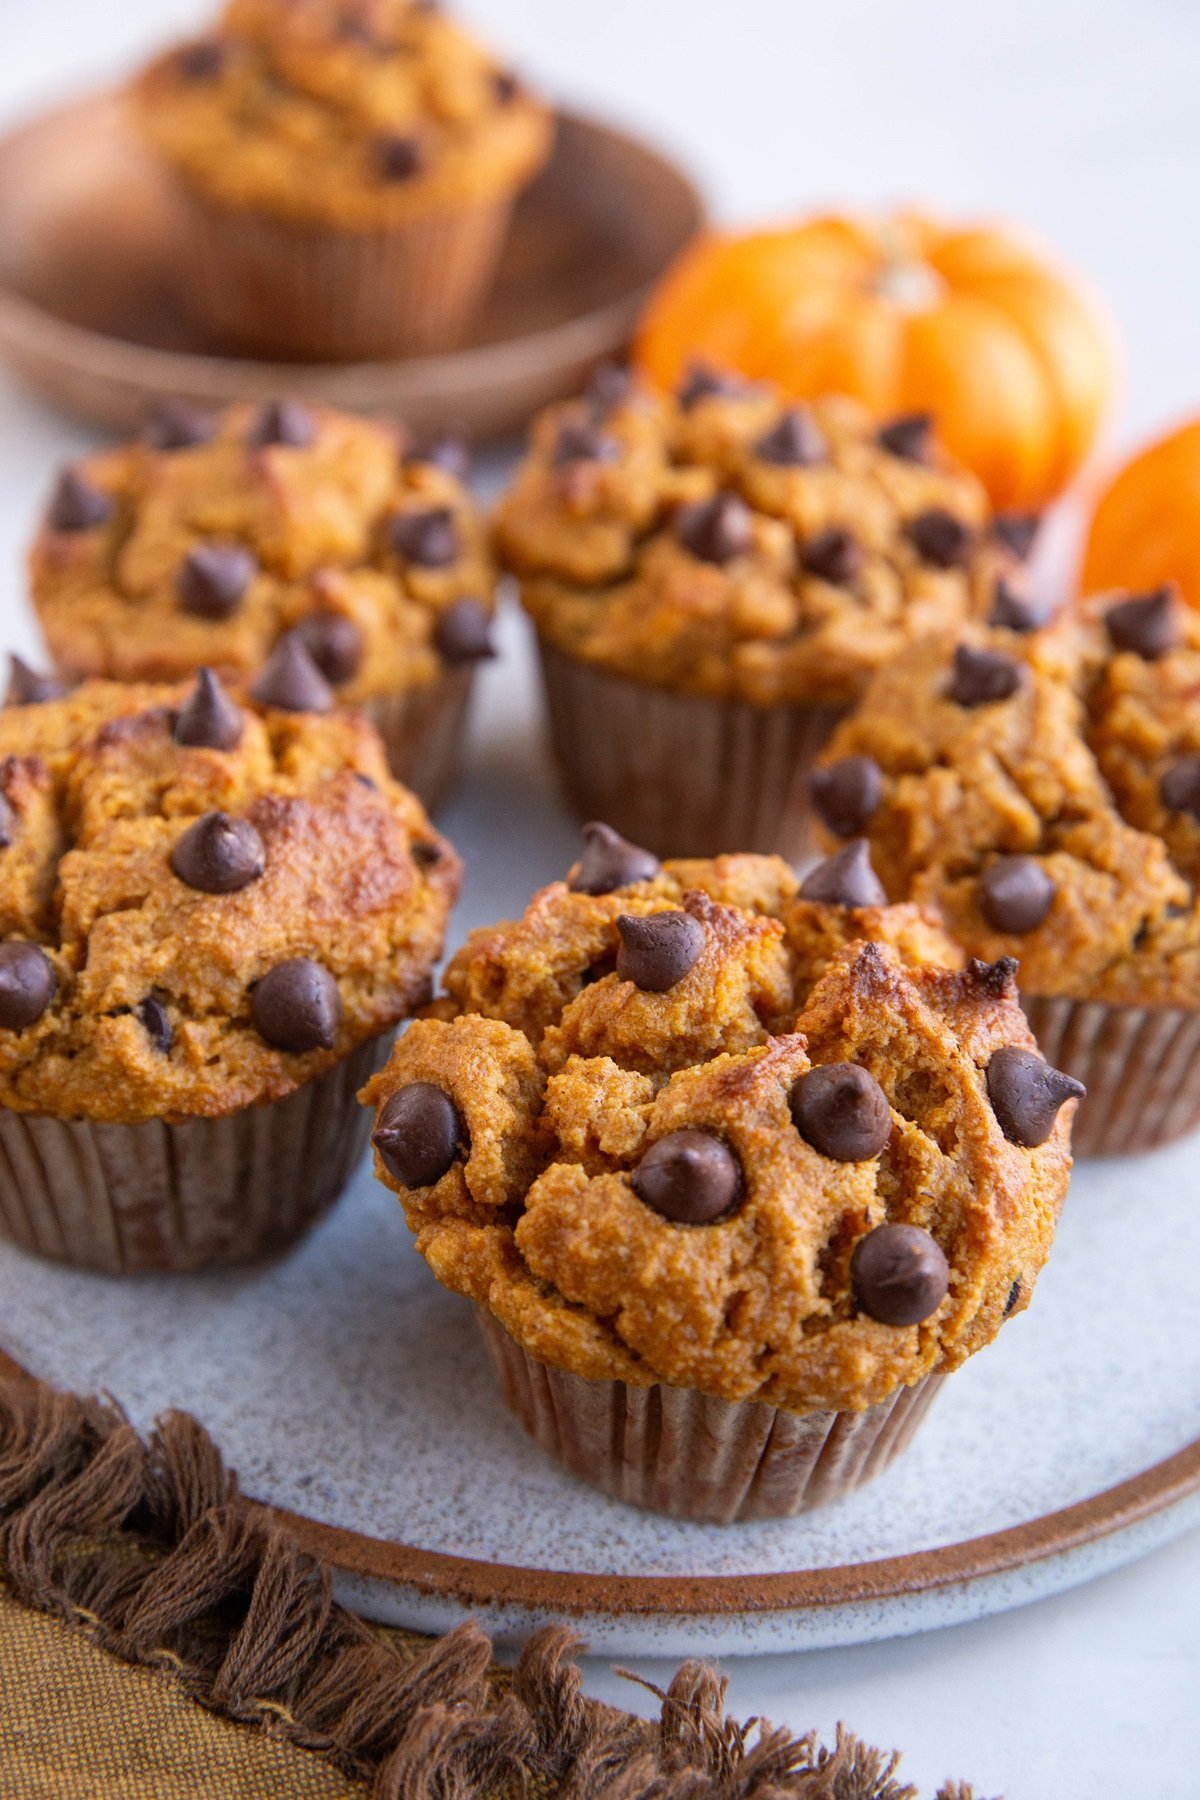 Almond Flour pumpkin muffins on a plate, ready to serve, with small pumpkins in the background.